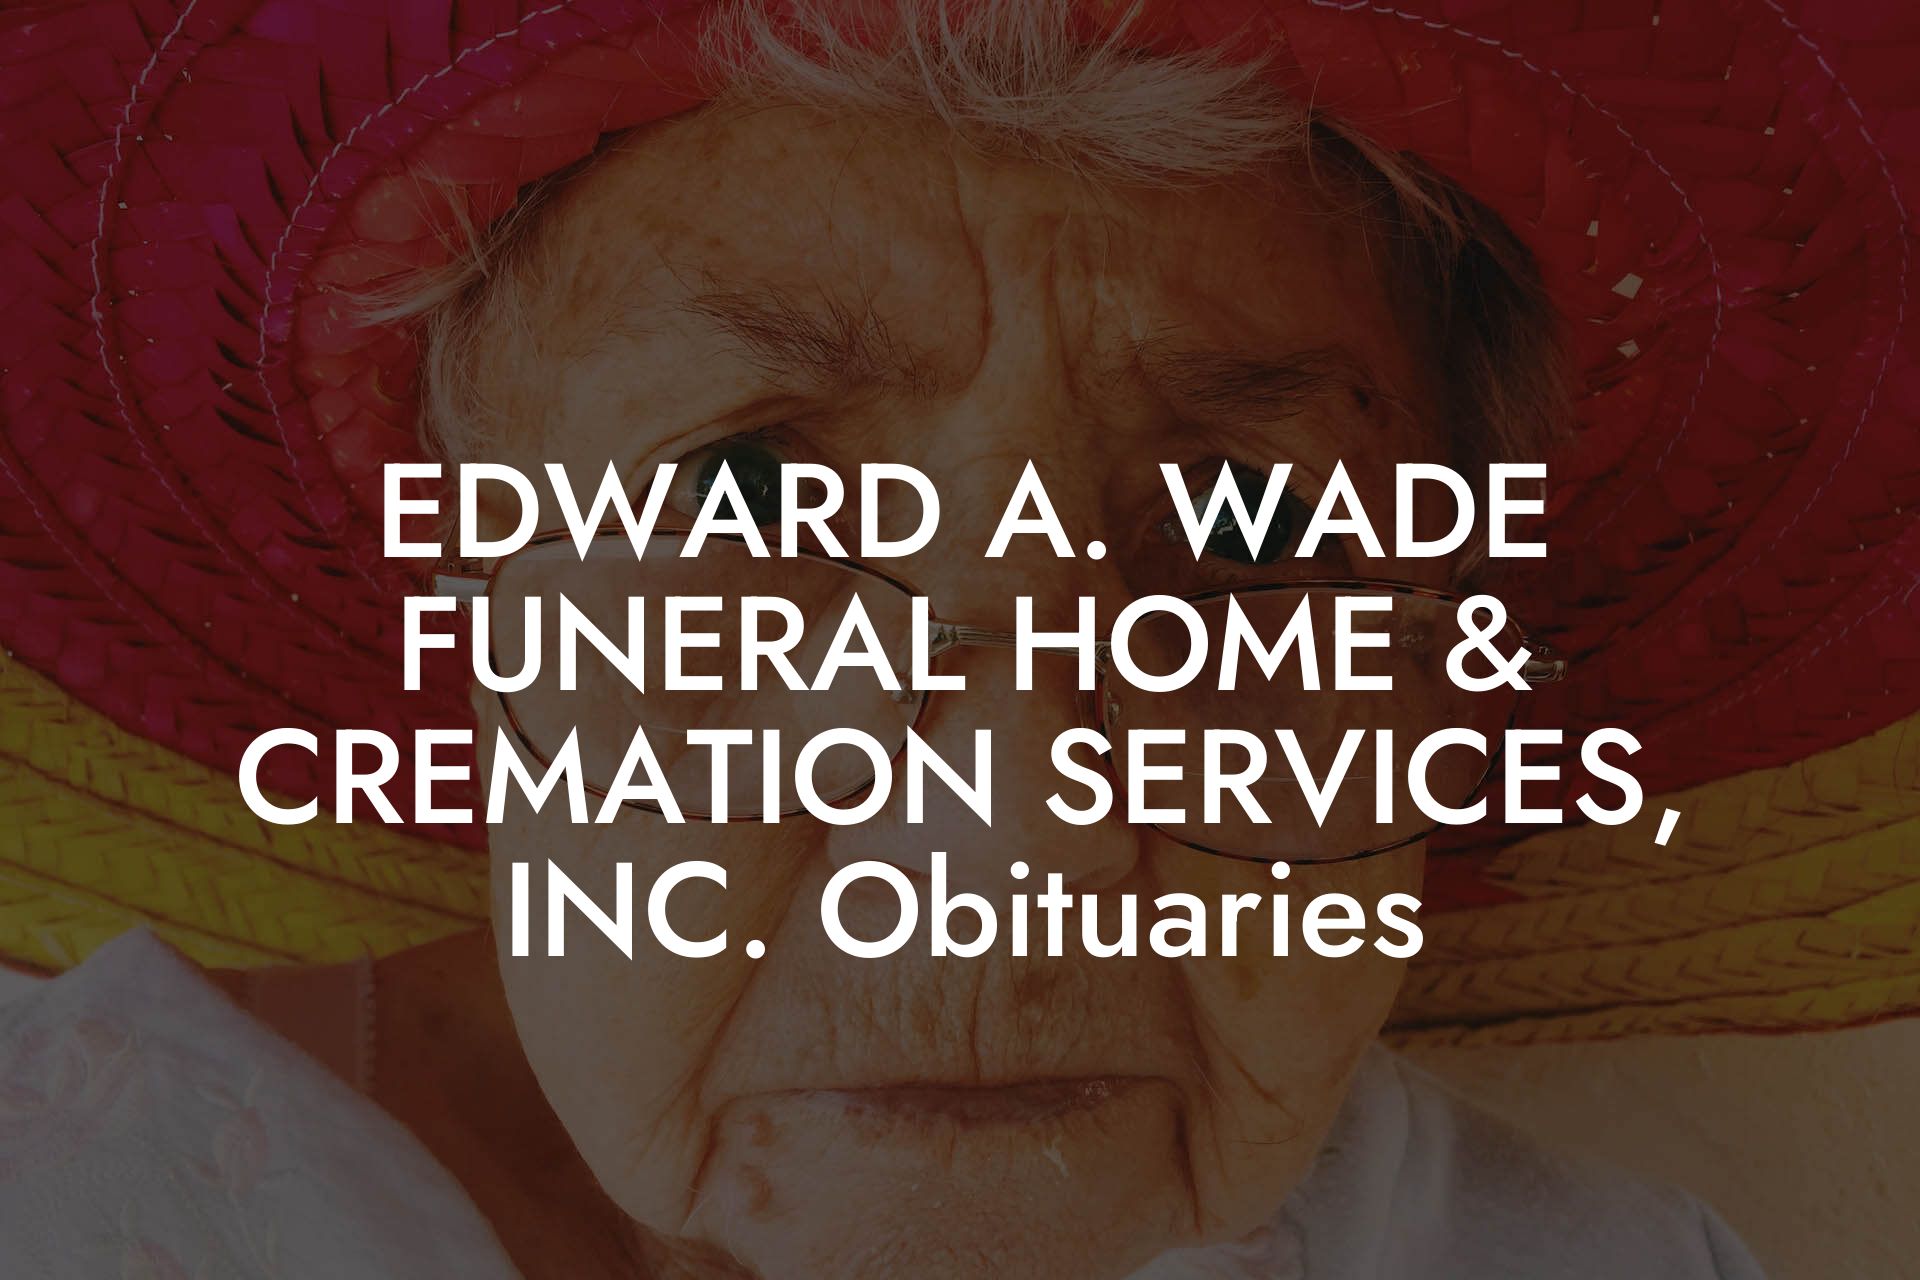 EDWARD A. WADE FUNERAL HOME & CREMATION SERVICES, INC. Obituaries